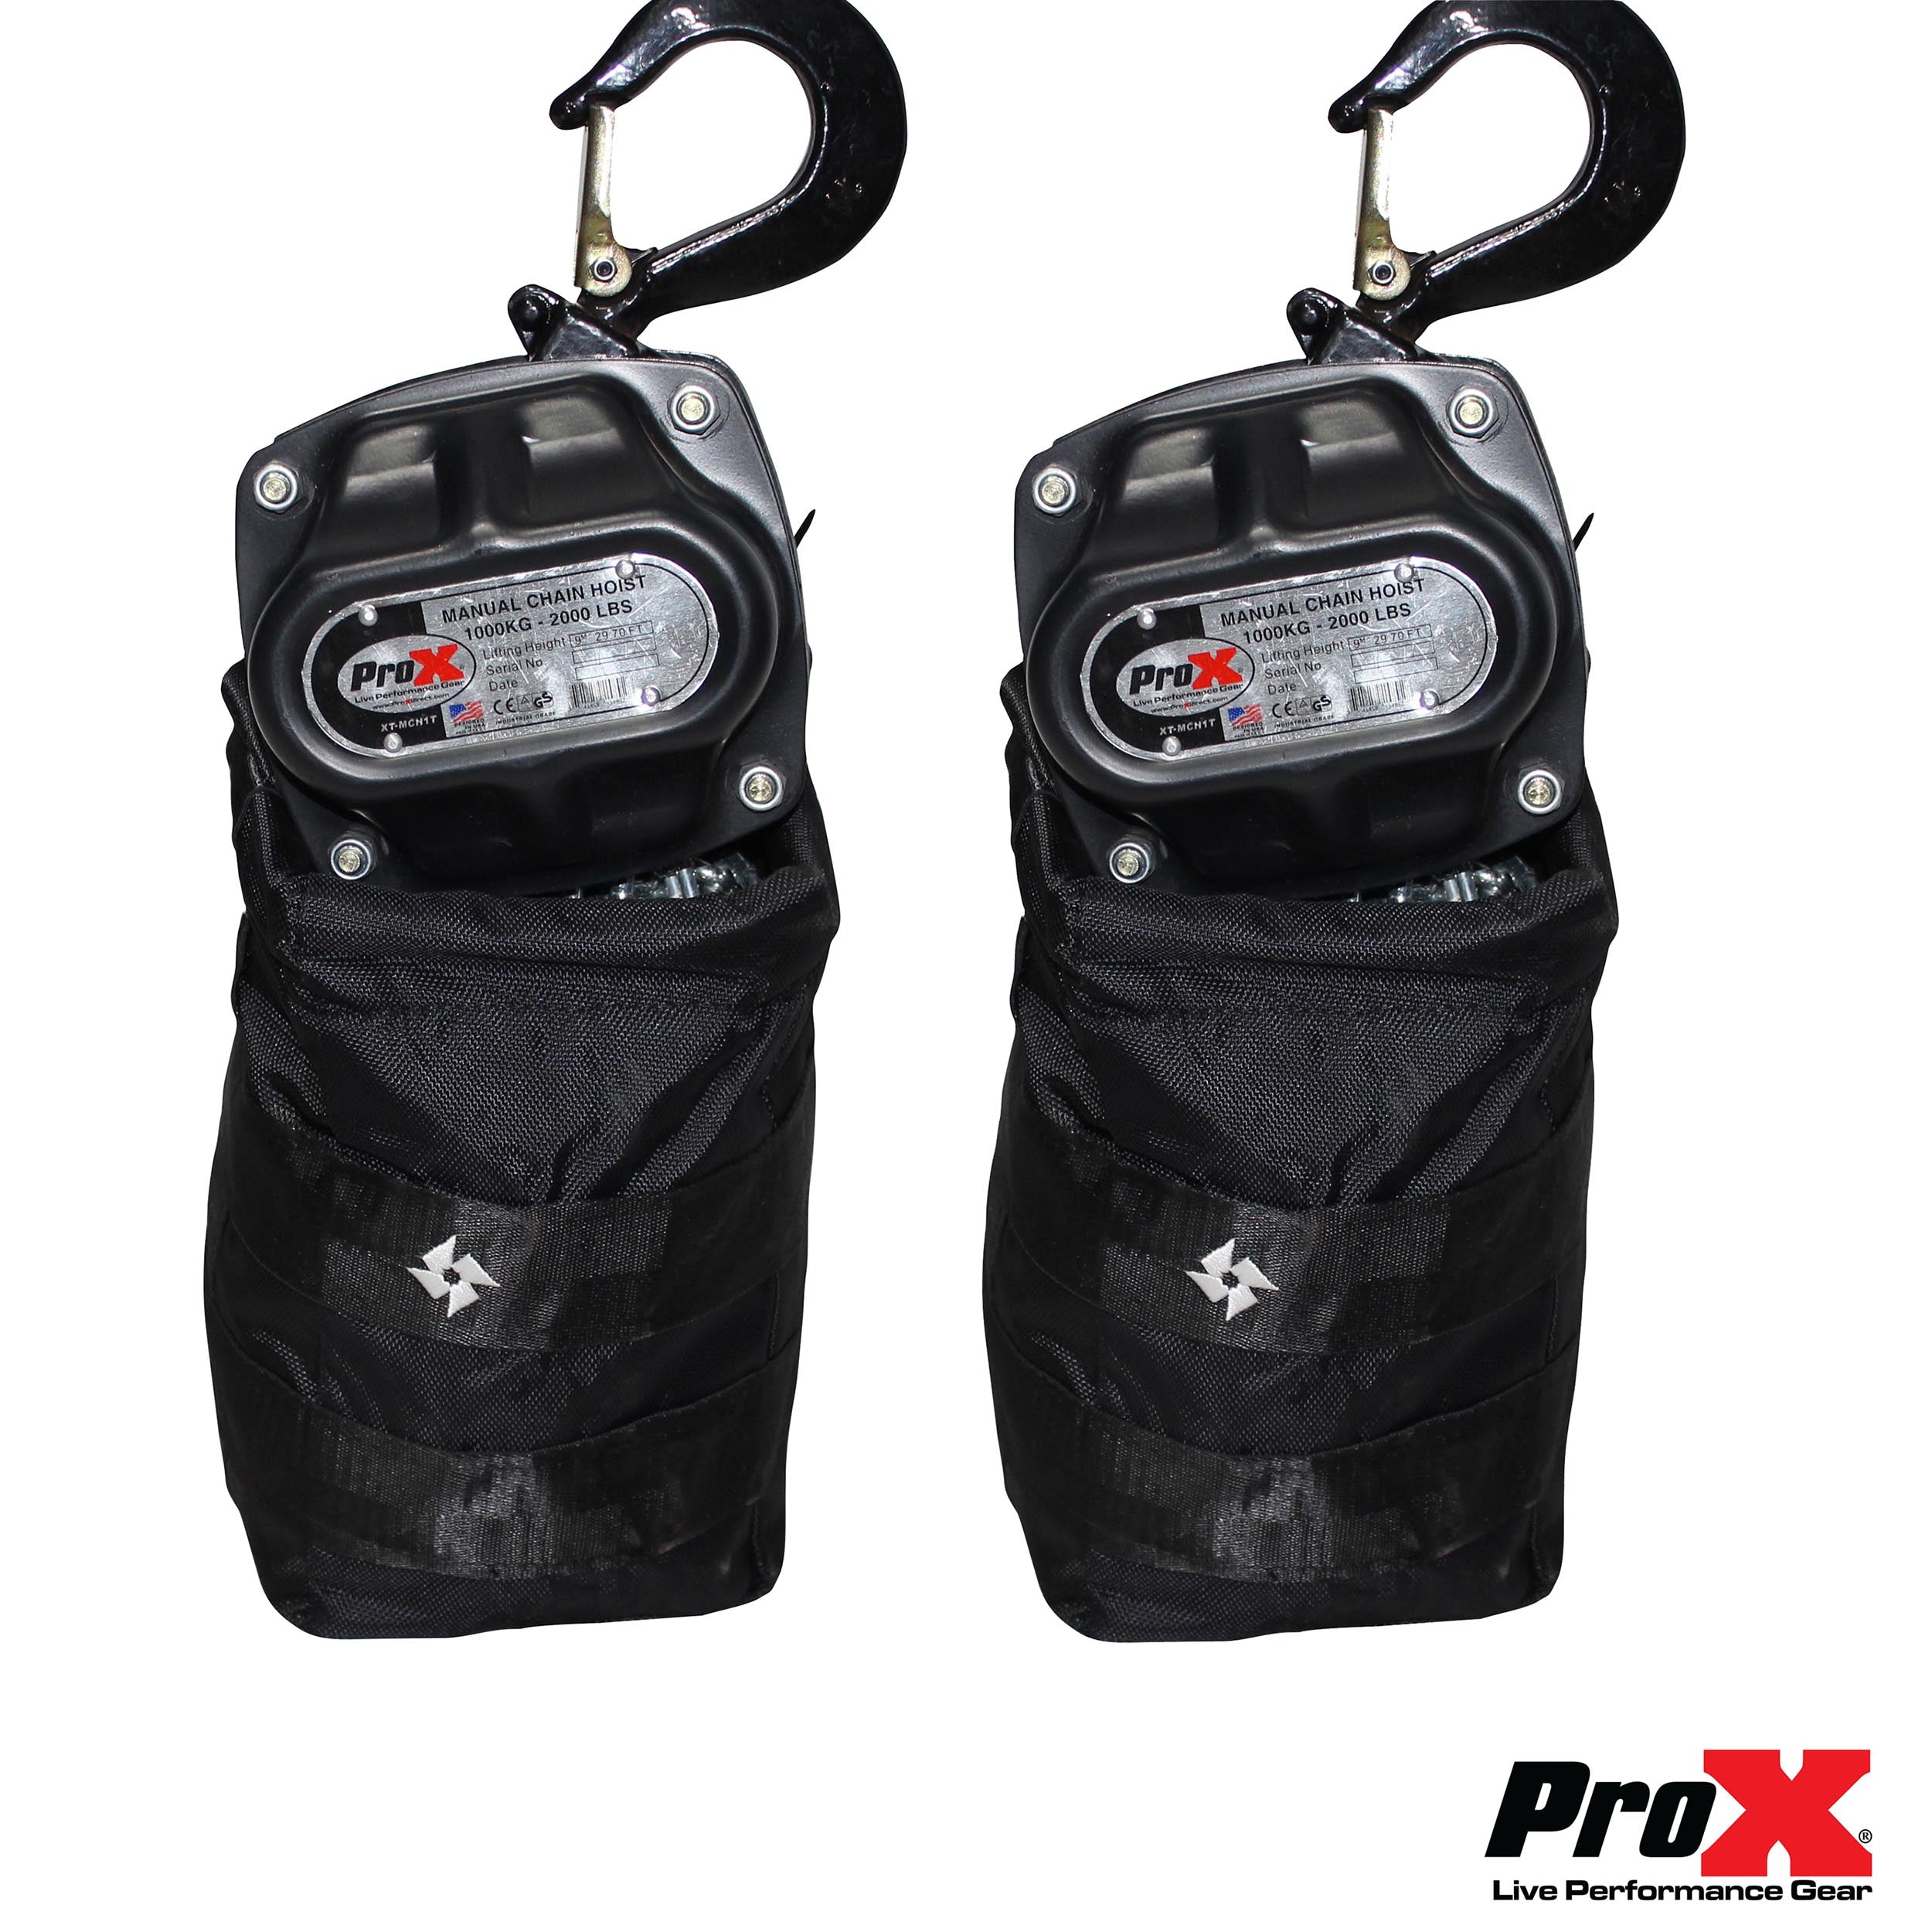 Pro X air 1 Ton Manual Chain Hoist with 30 Ft (9 M) Chain for Stage Truss roof system and line array speakers XT-MCH1TX2-30FT